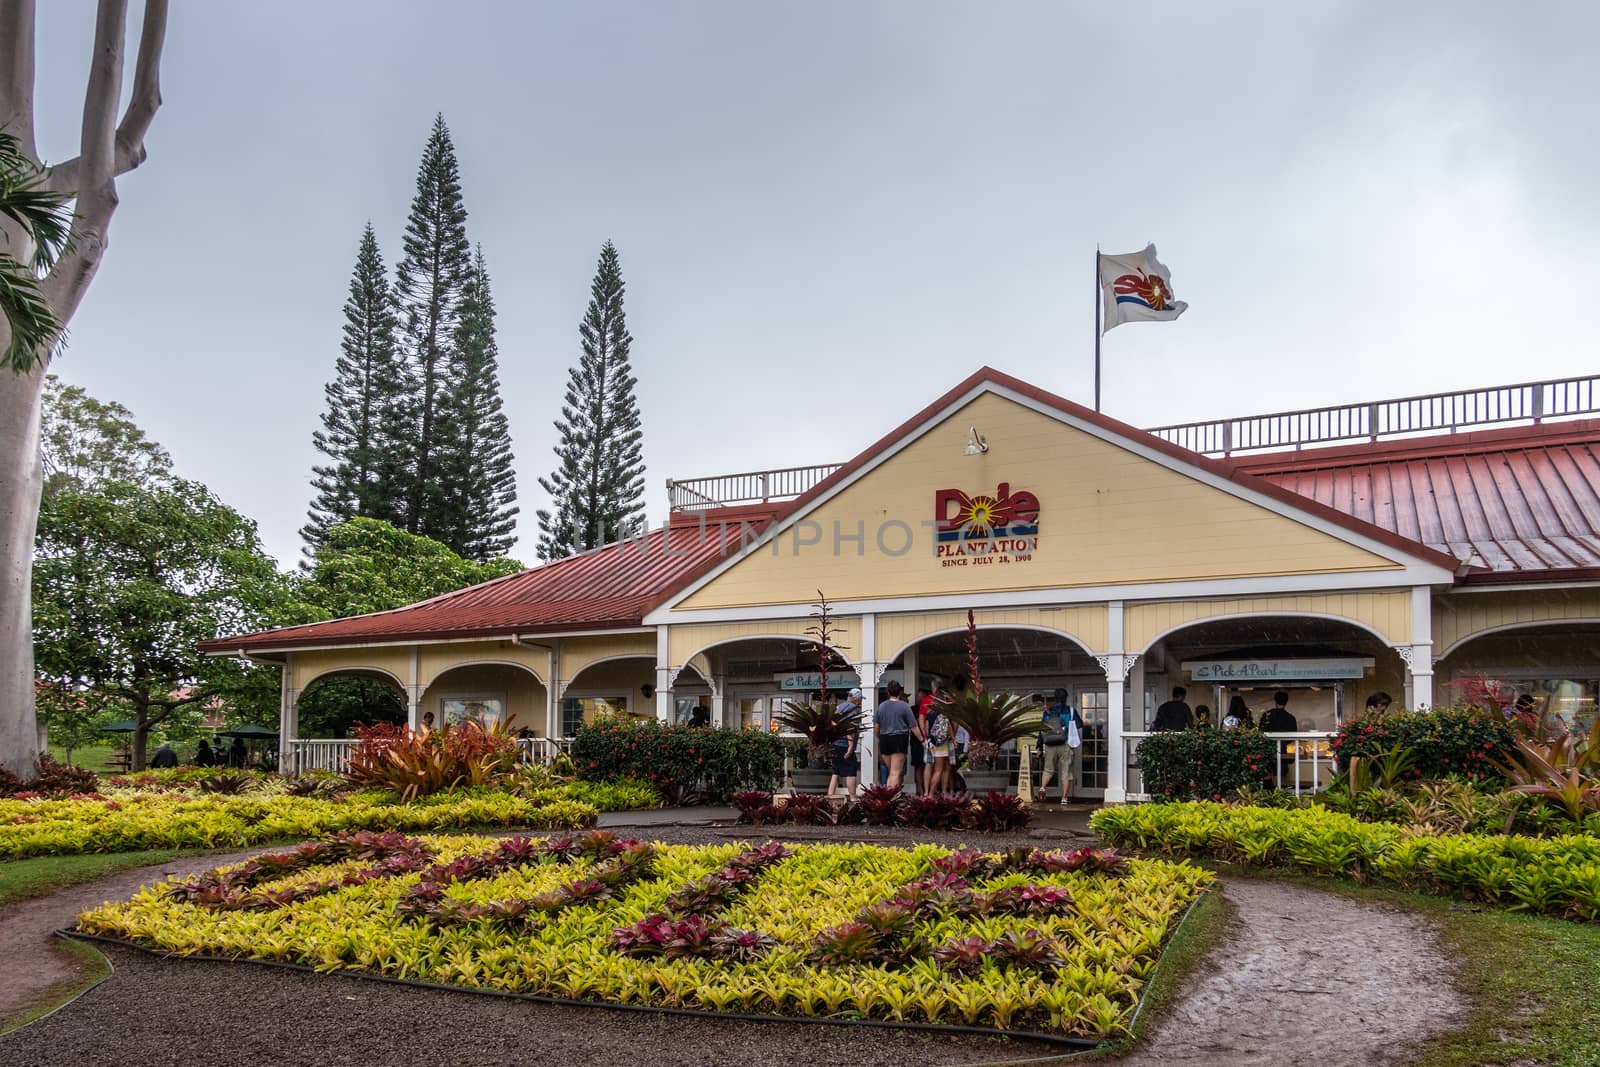 Wahiawa, Oahu, Hawaii, USA. - January 09, 2020: Welcome building, entrance to Dole pineapple plantation, museum and shop. Yellow wall, red roof, green, red and yellow vegetation under light blue sky.